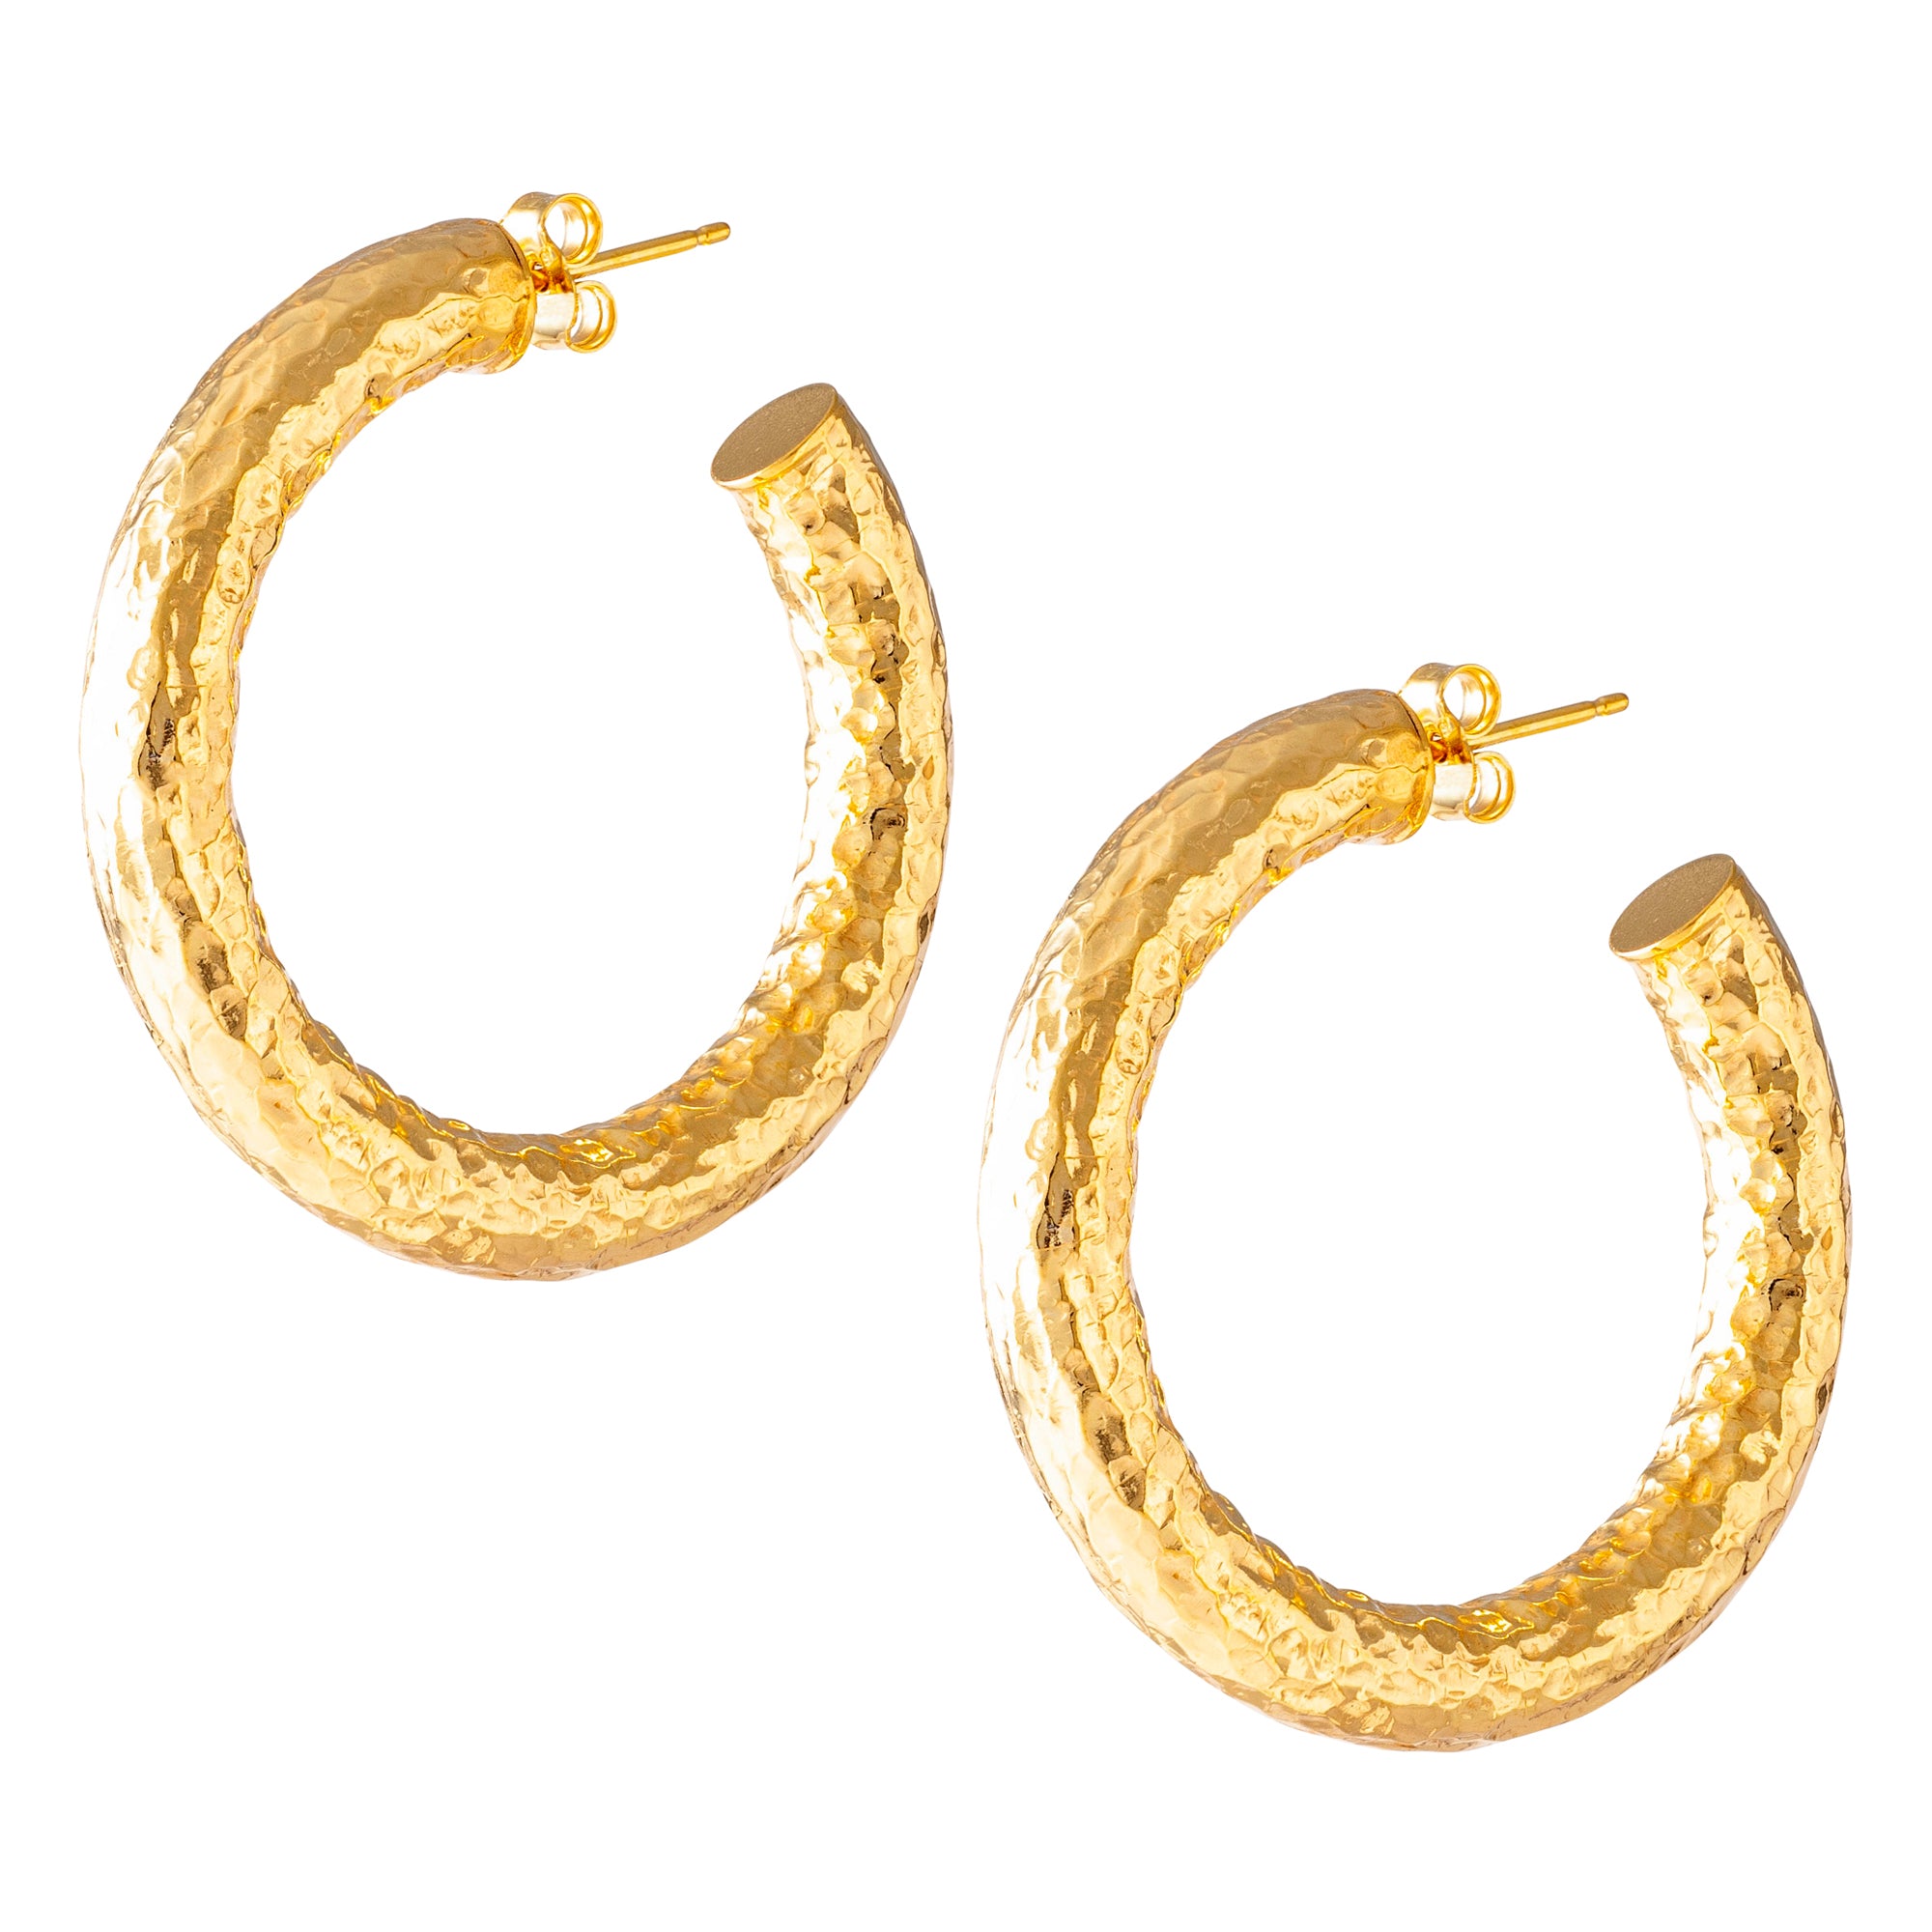 SMALL HAMMERED GOLD HOOP EARRINGS